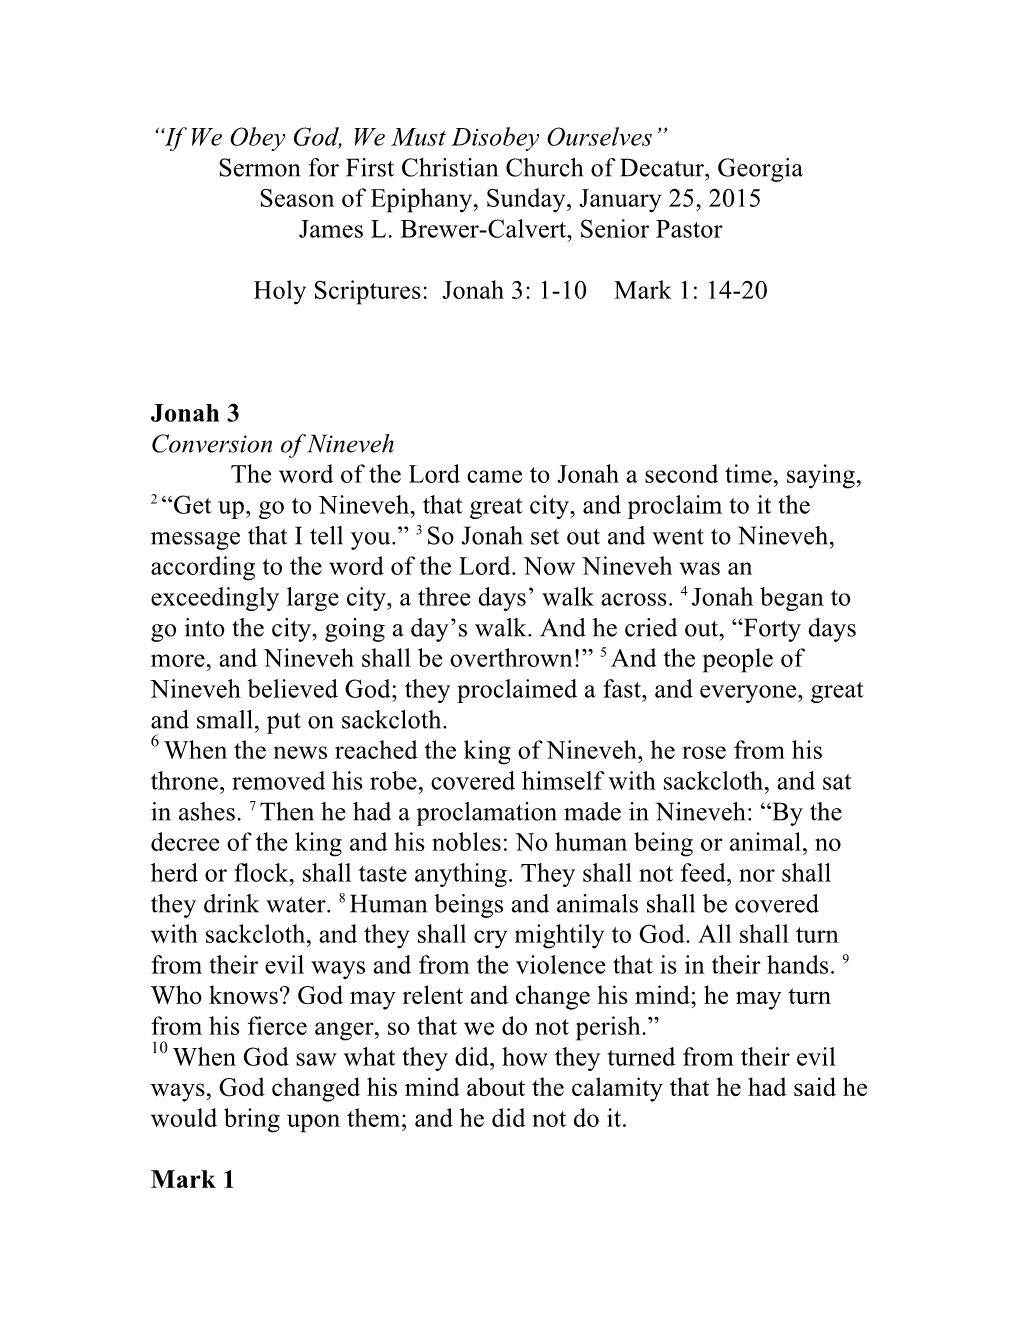 If We Obey God, We Must Disobey Ourselves” Sermon for First Christian Church of Decatur, Georgia Season of Epiphany, Sunday, January 25, 2015 James L